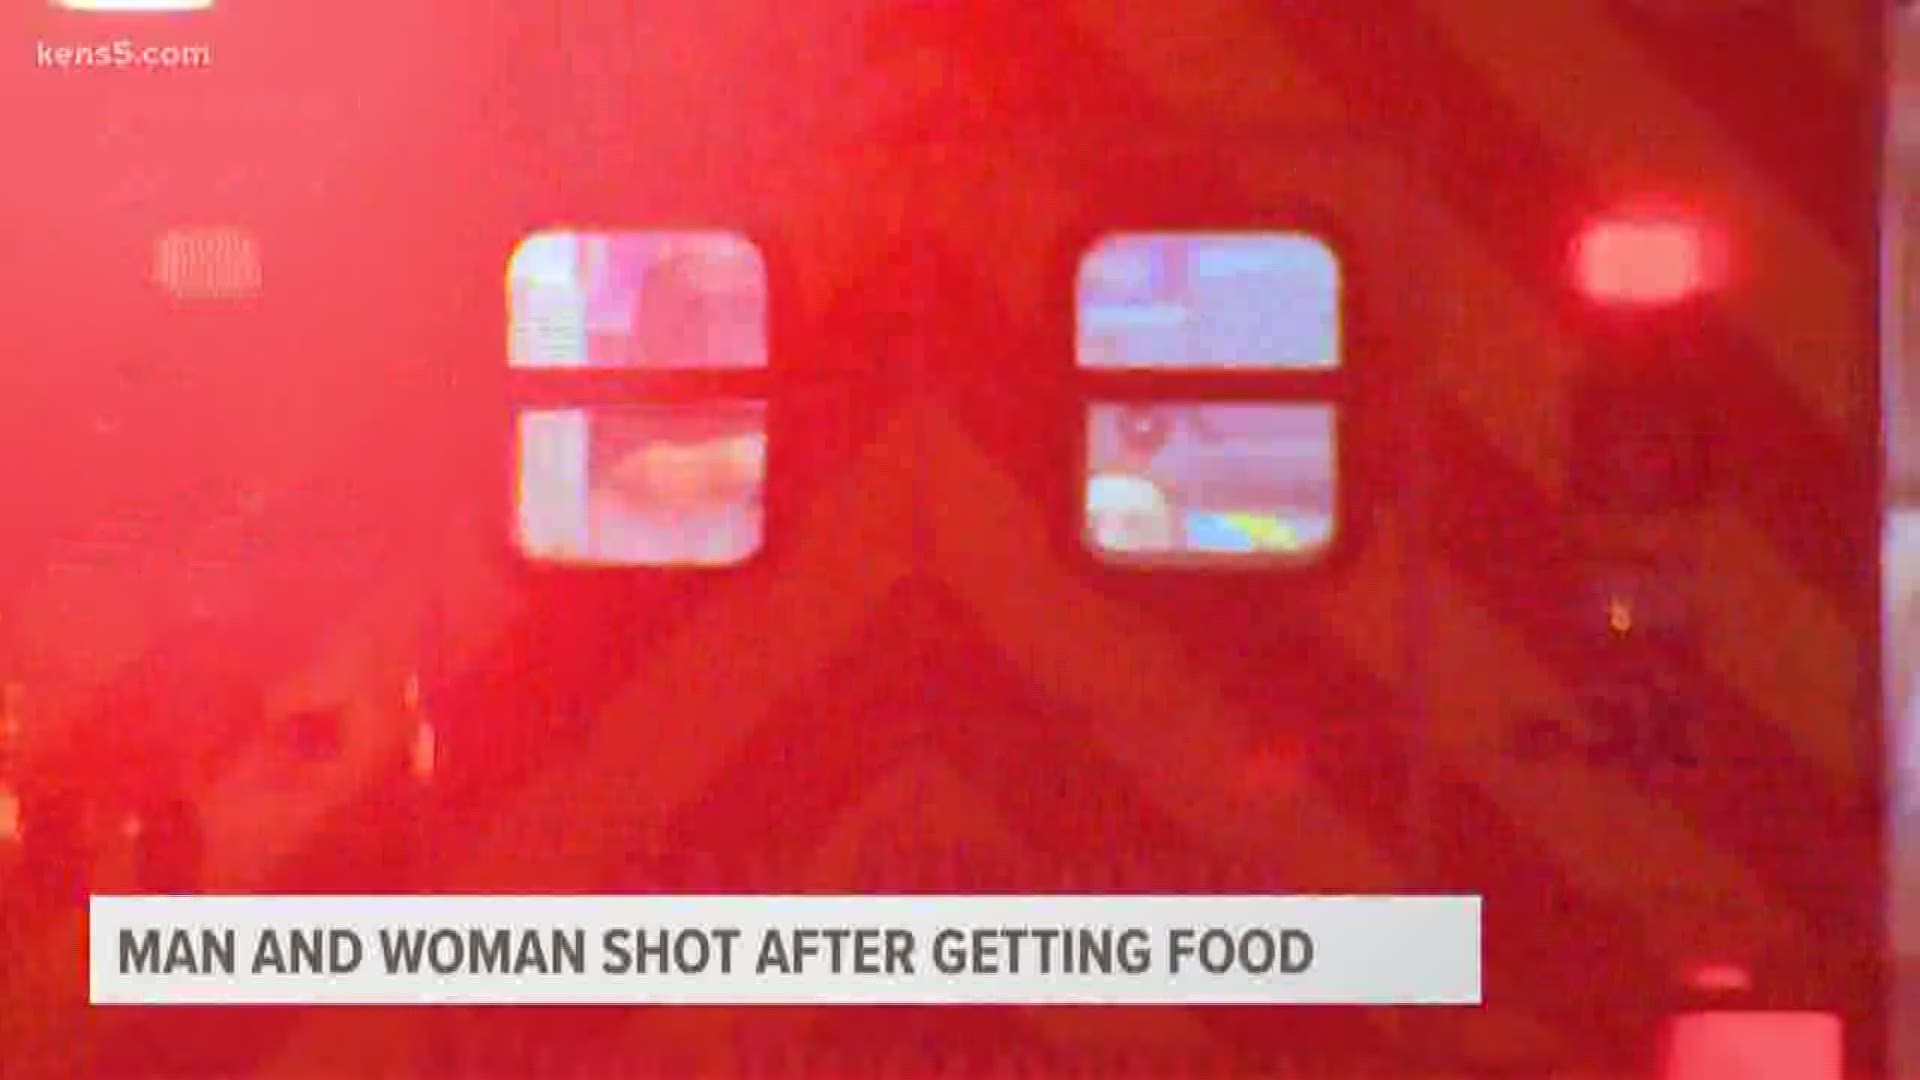 A late-night food run ended with a woman dead.